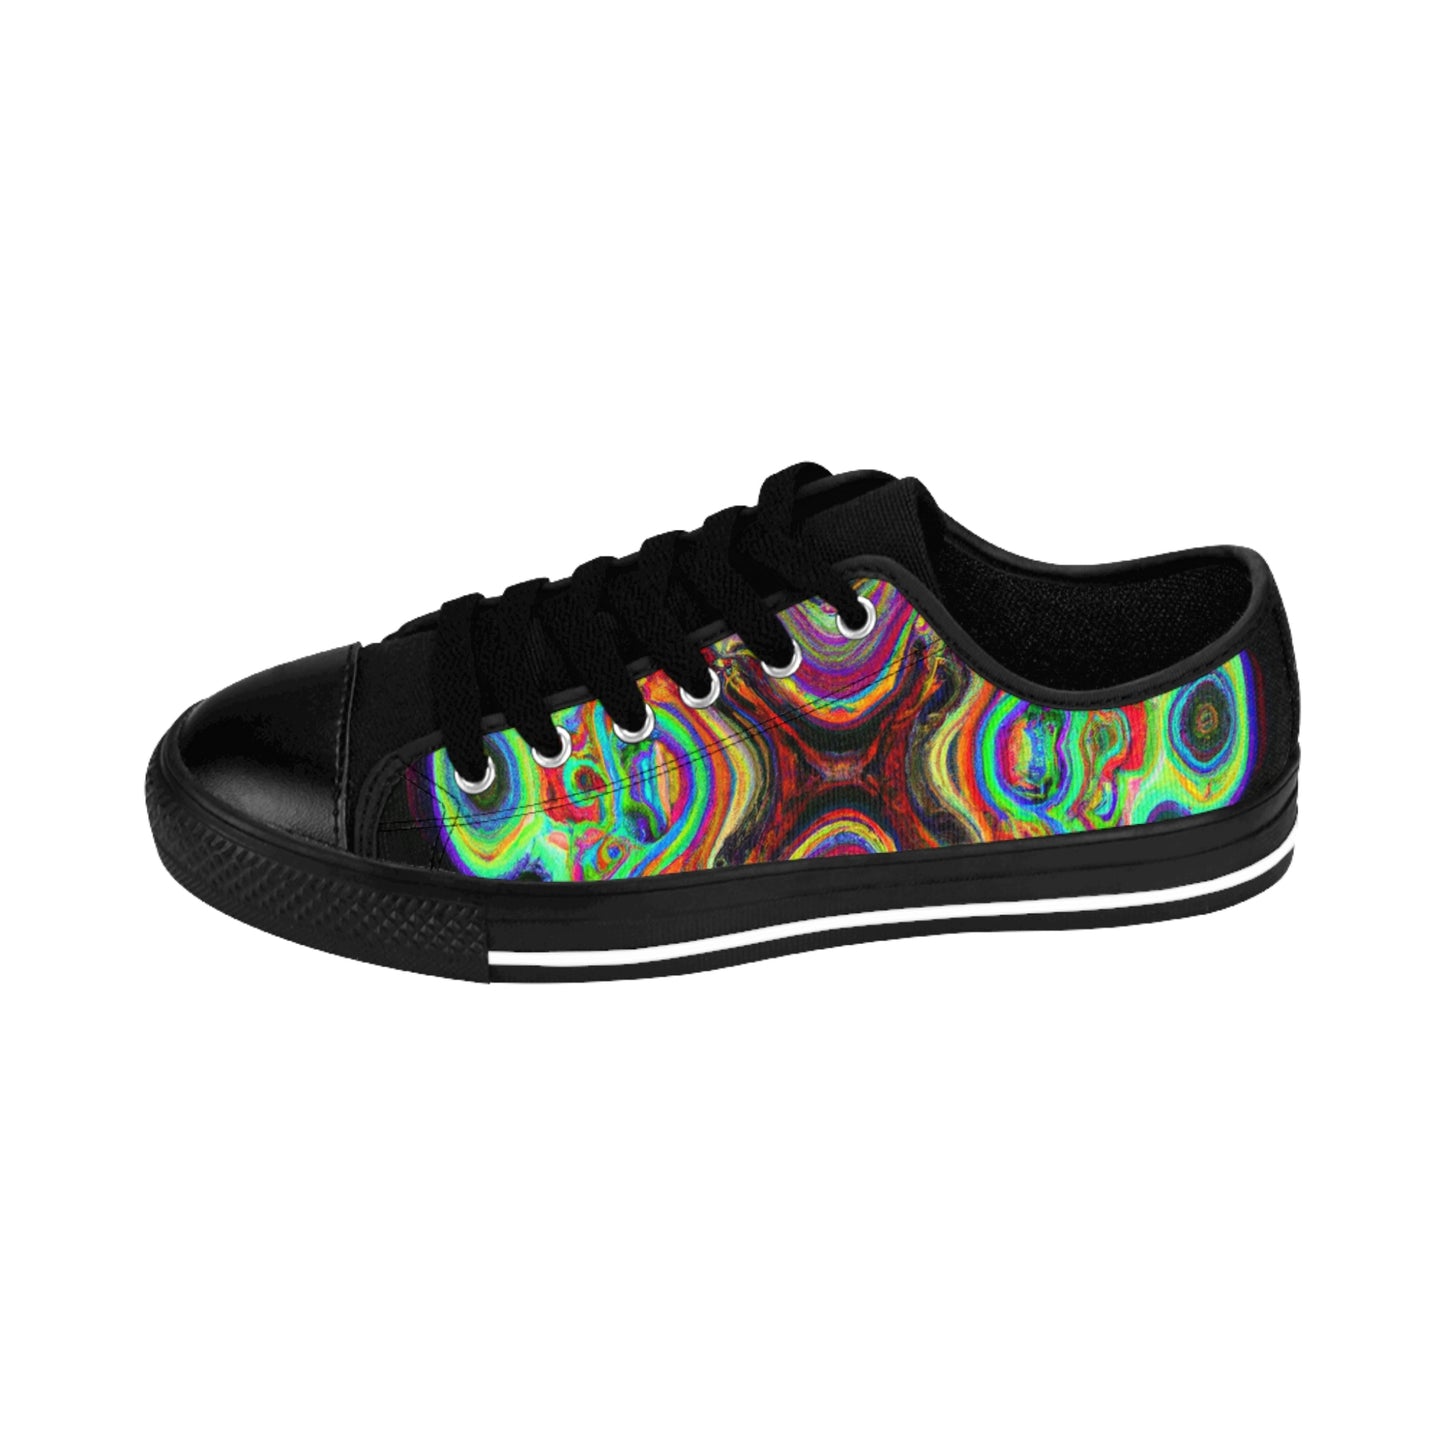 Oswin the Unstoppable - Psychedelic Low Top